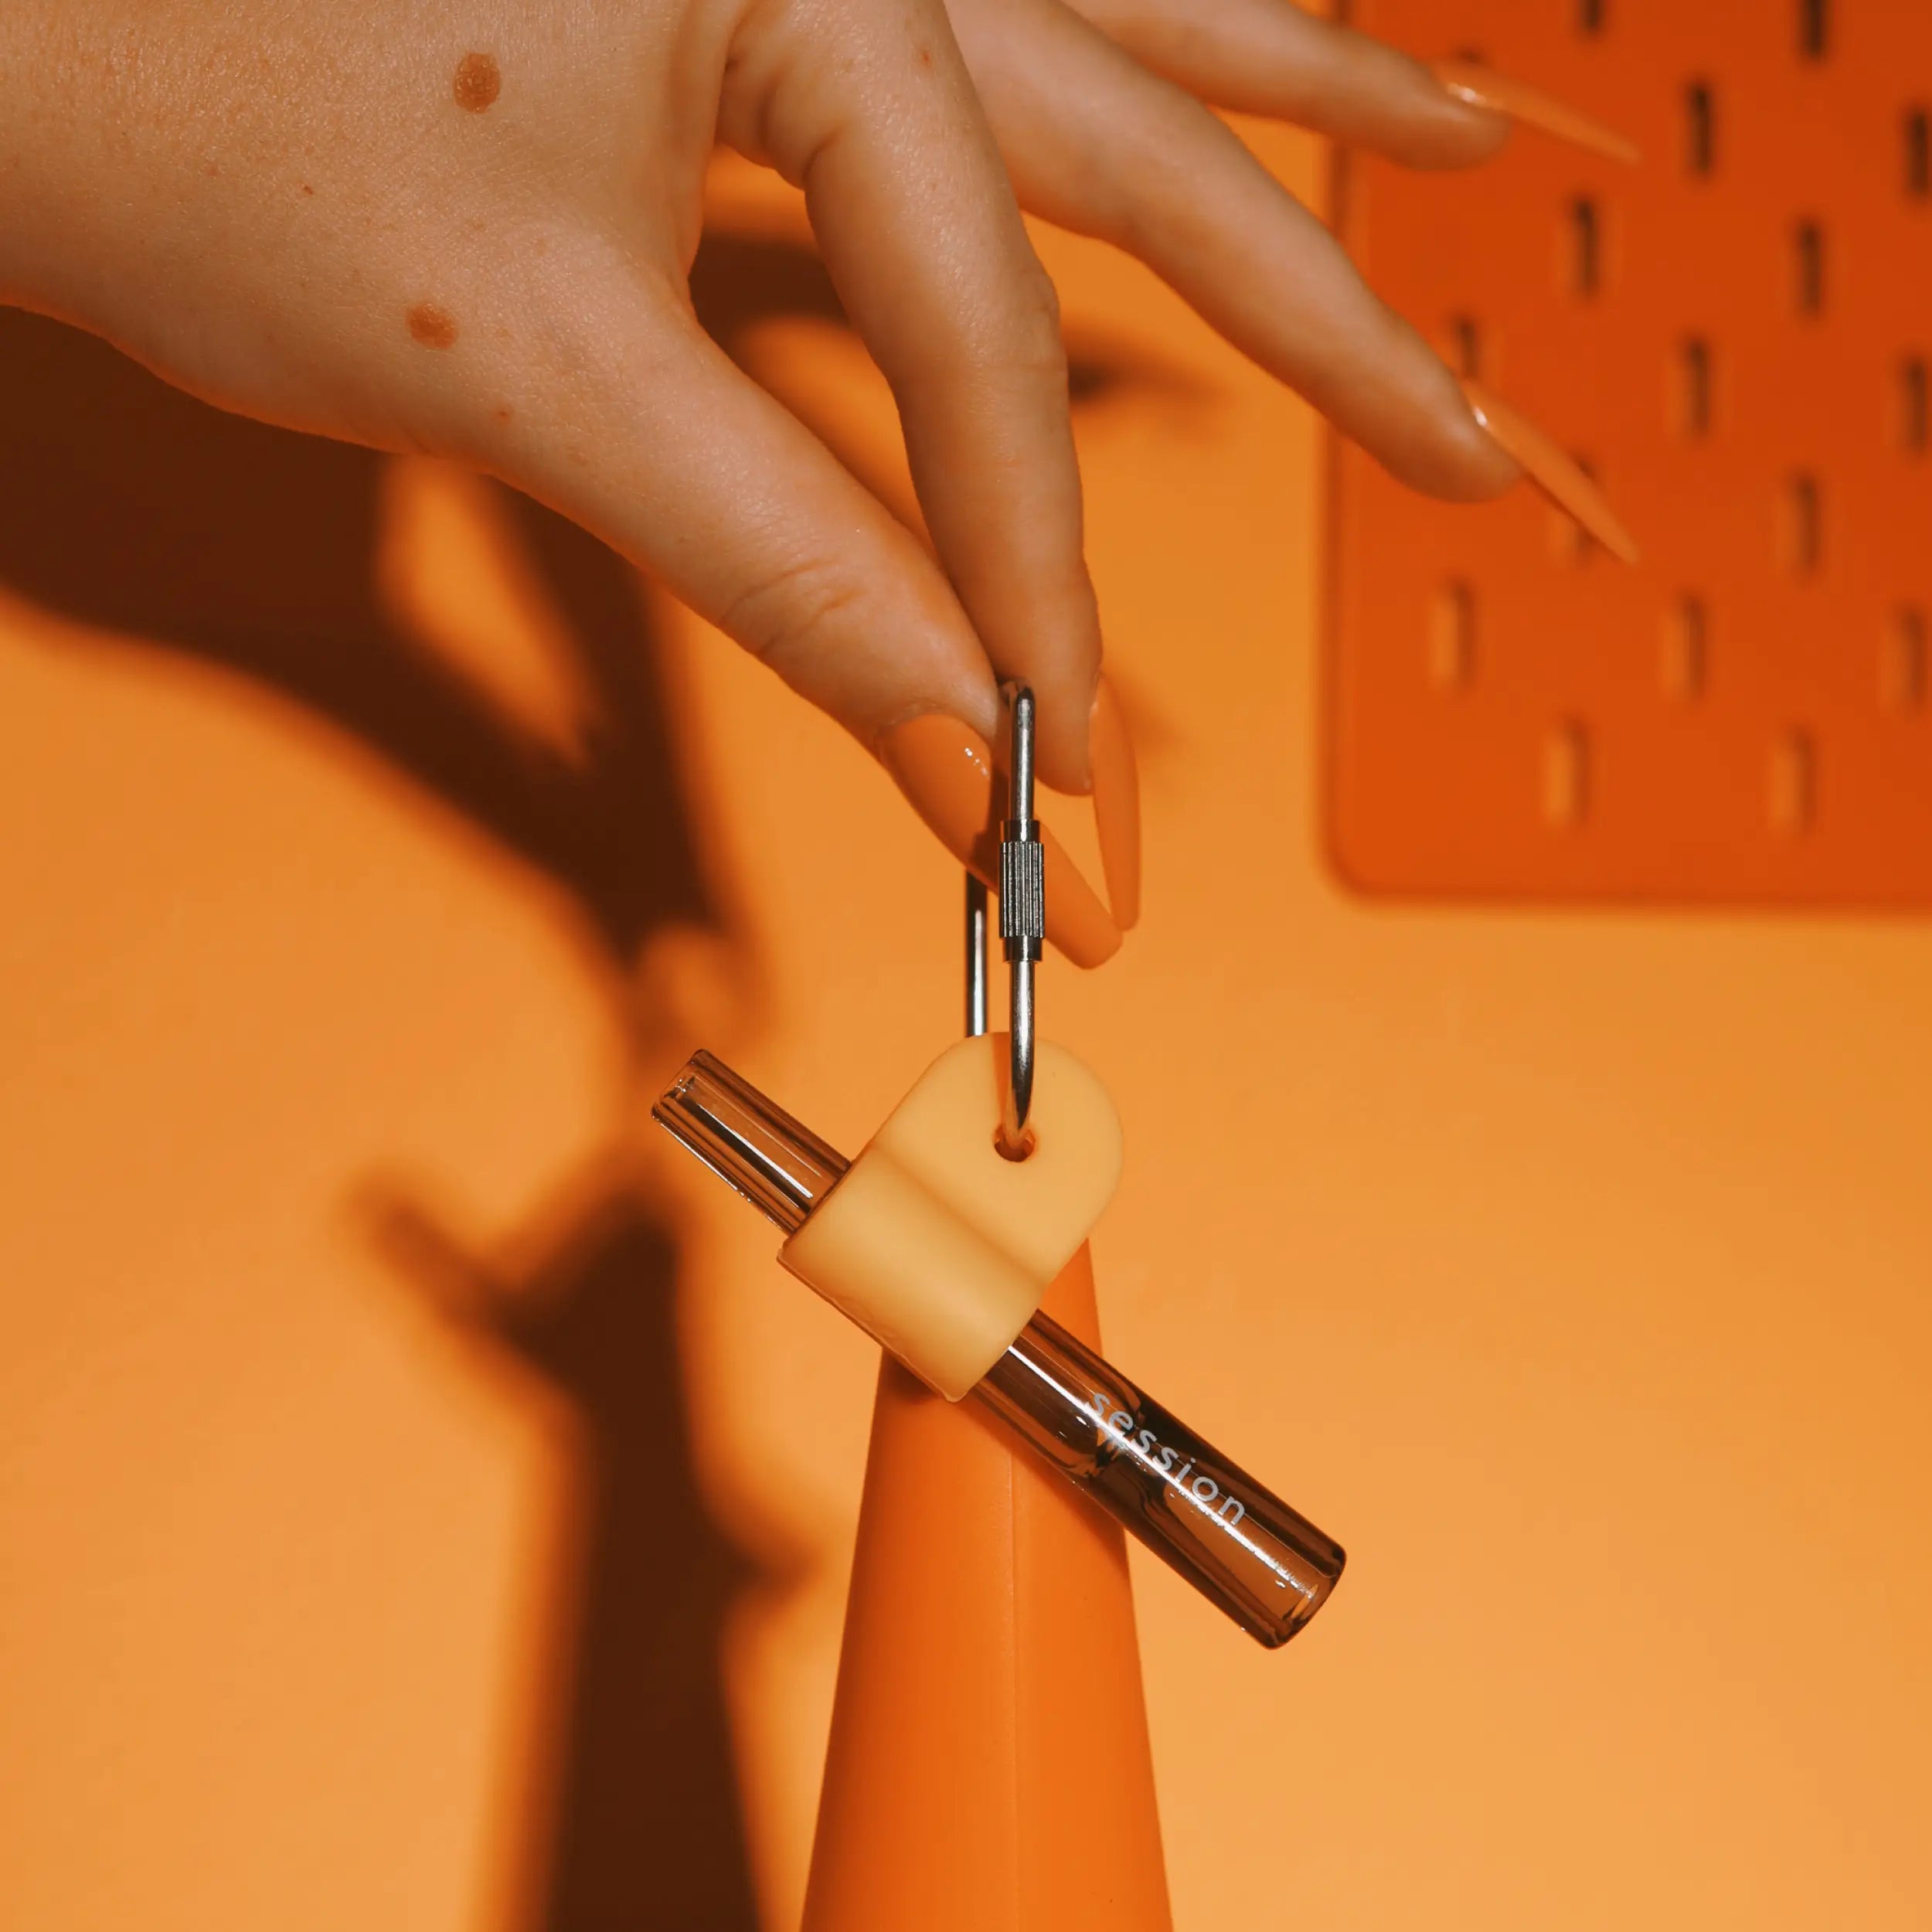 Premium Quality One Hitter in Horizon Orange by Session Goods.